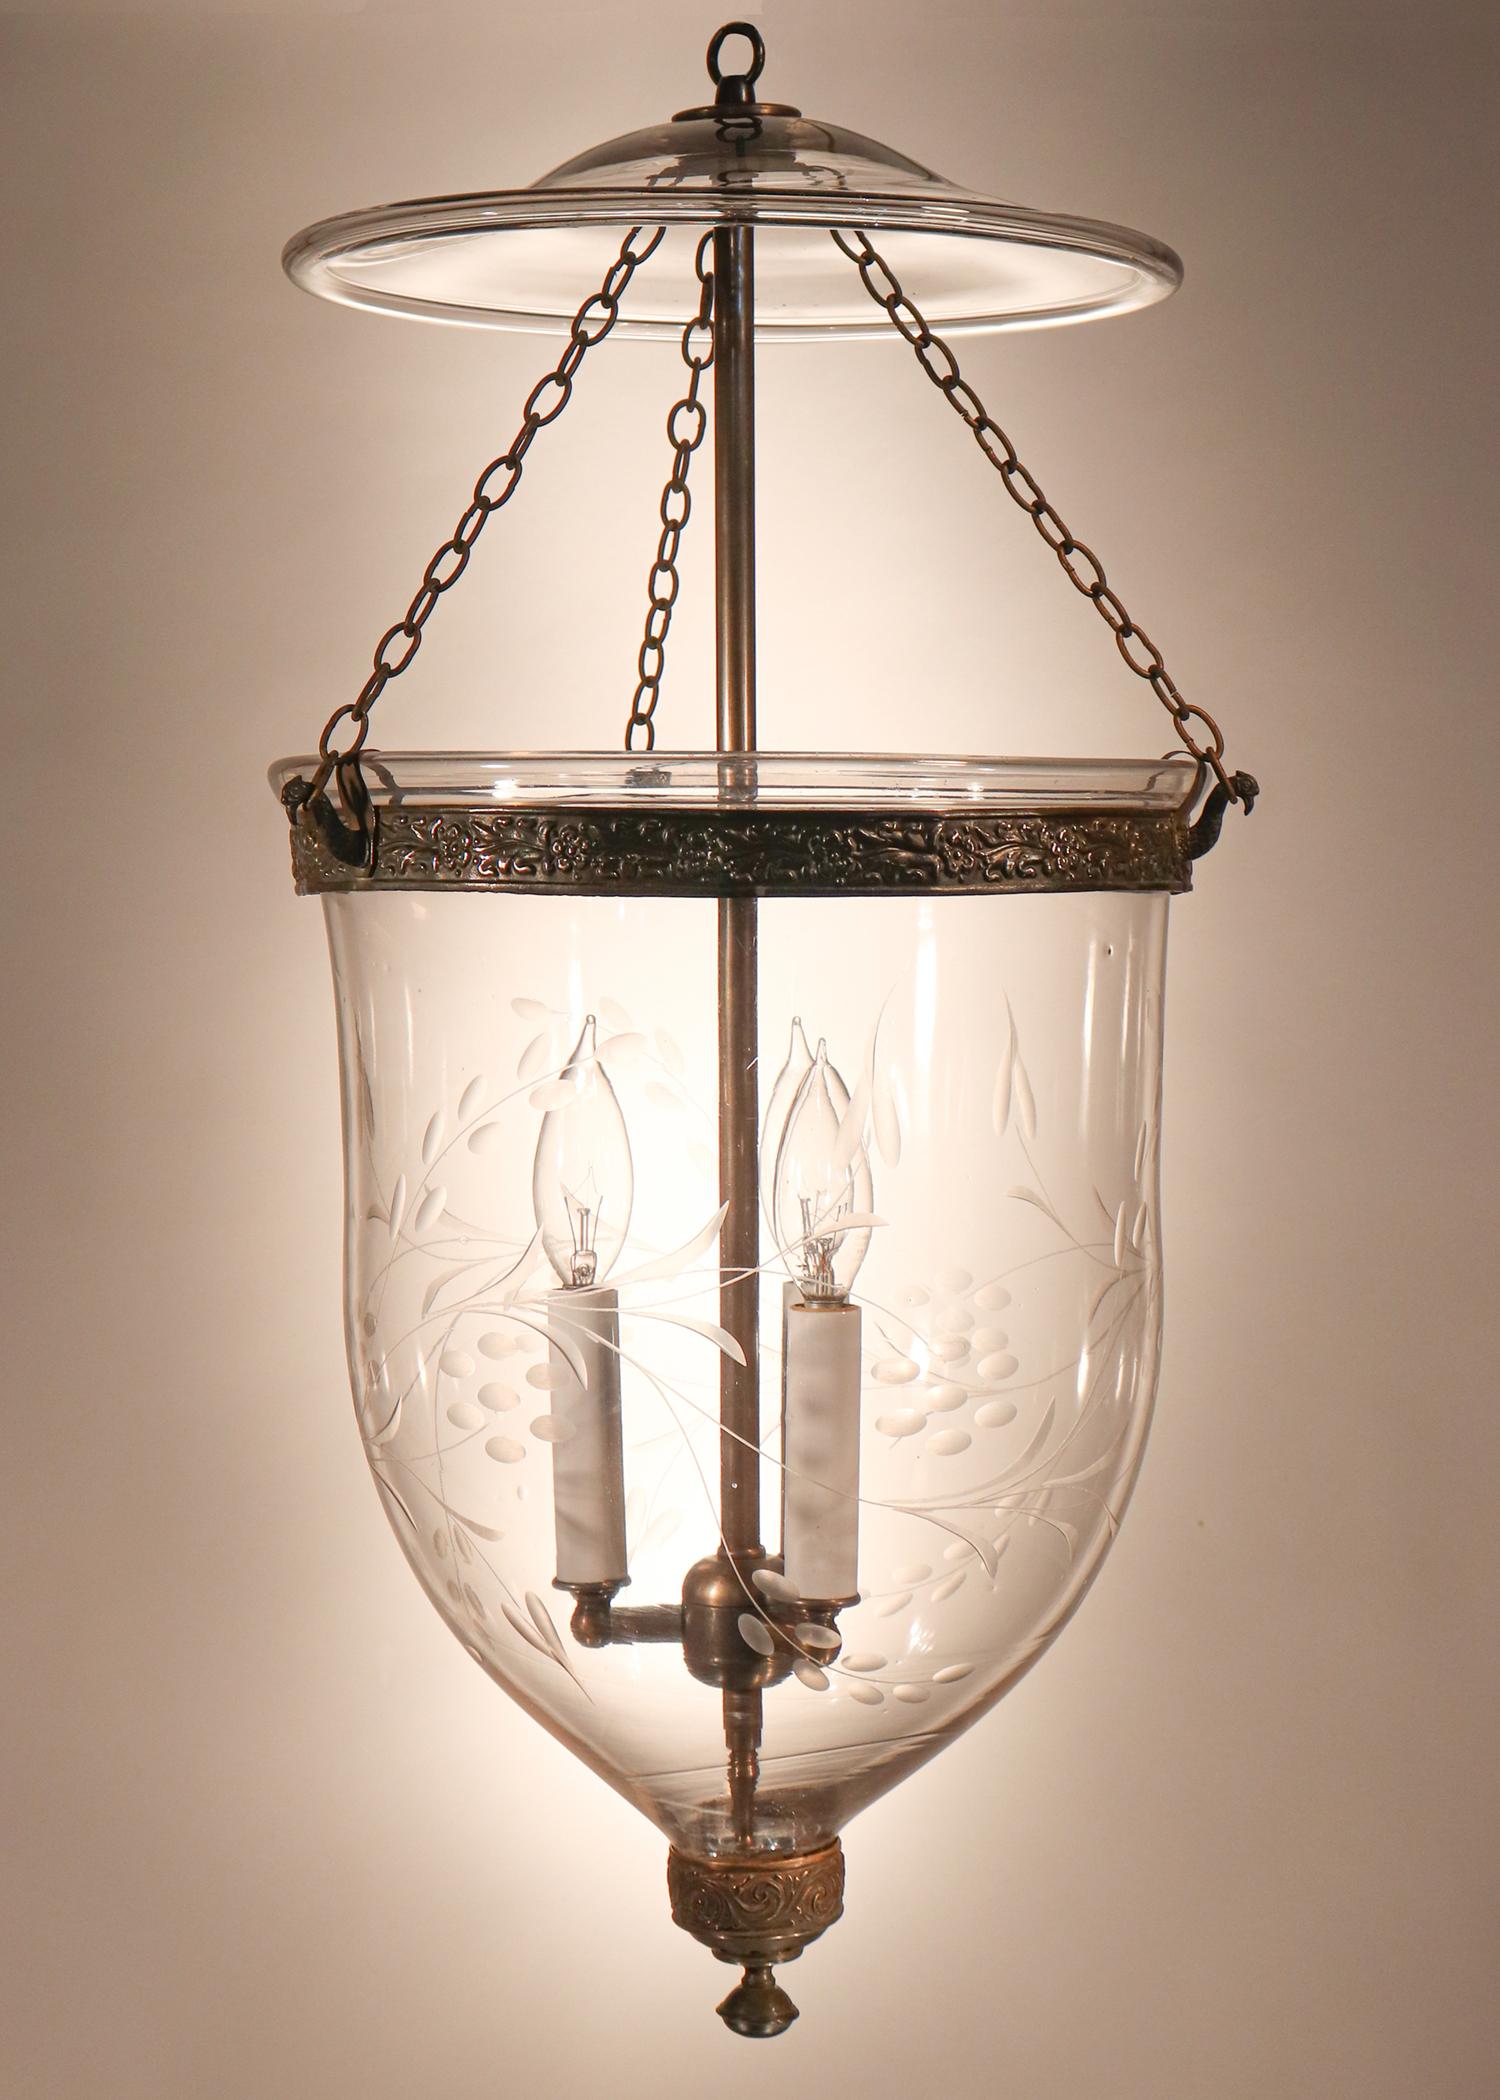 An exquisite antique English bell jar lantern with superb quality hand blown glass and a flowing, etched vine motif. This circa 1850 lantern features its original embossed brass band and brass finial/candleholder base (see photo detail). In